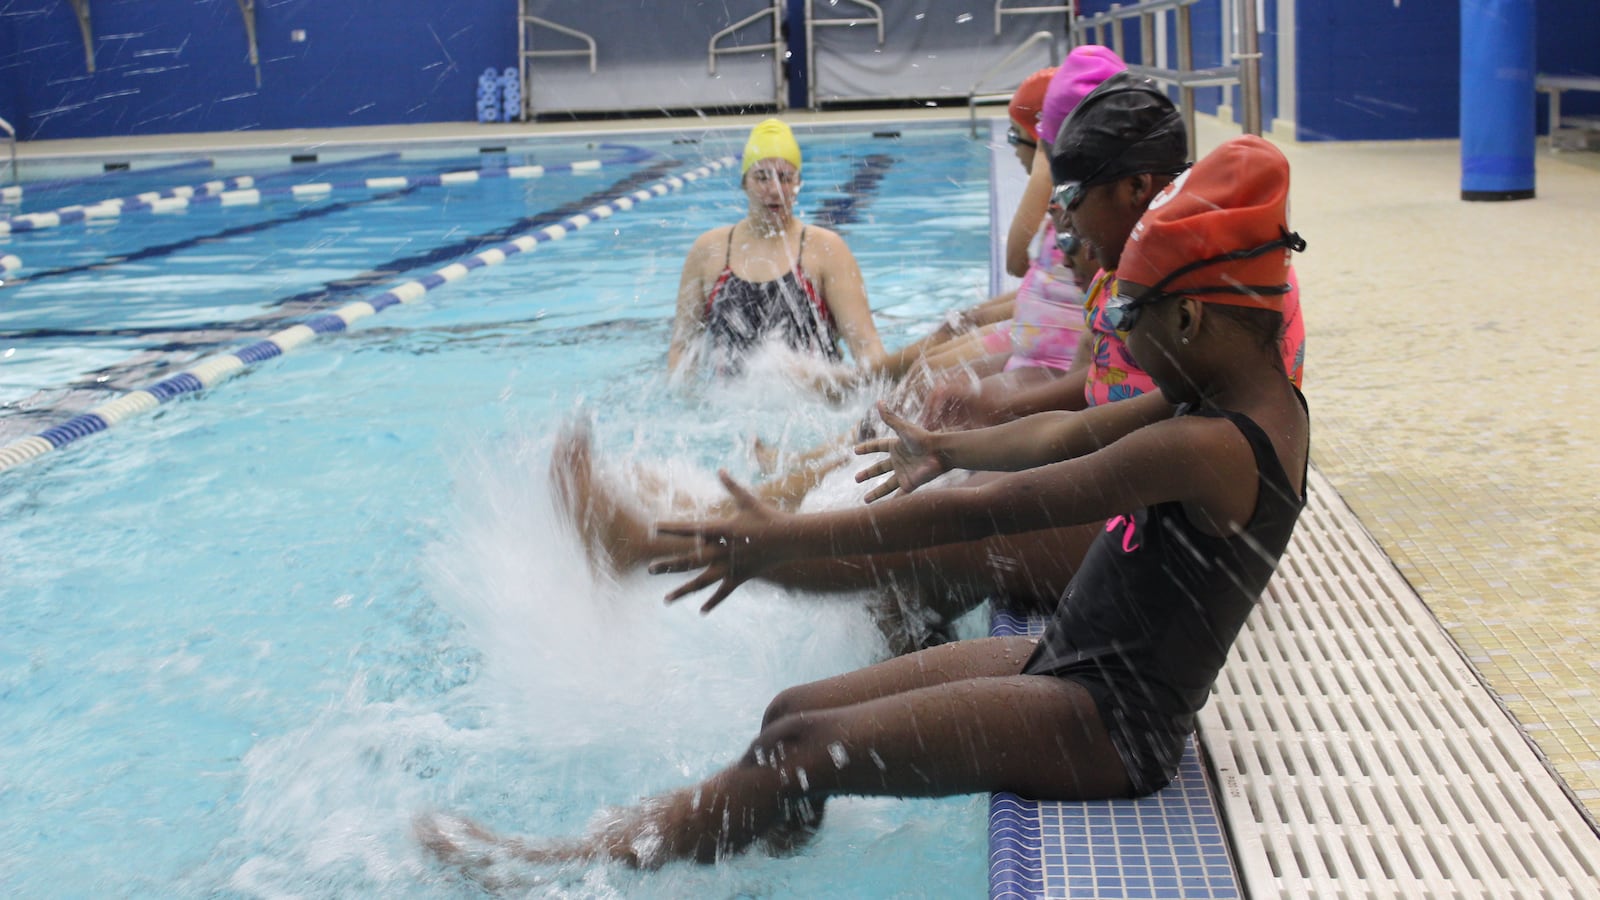 About half a dozen students try flutter kicks in a pool while an instructor watches nearby.